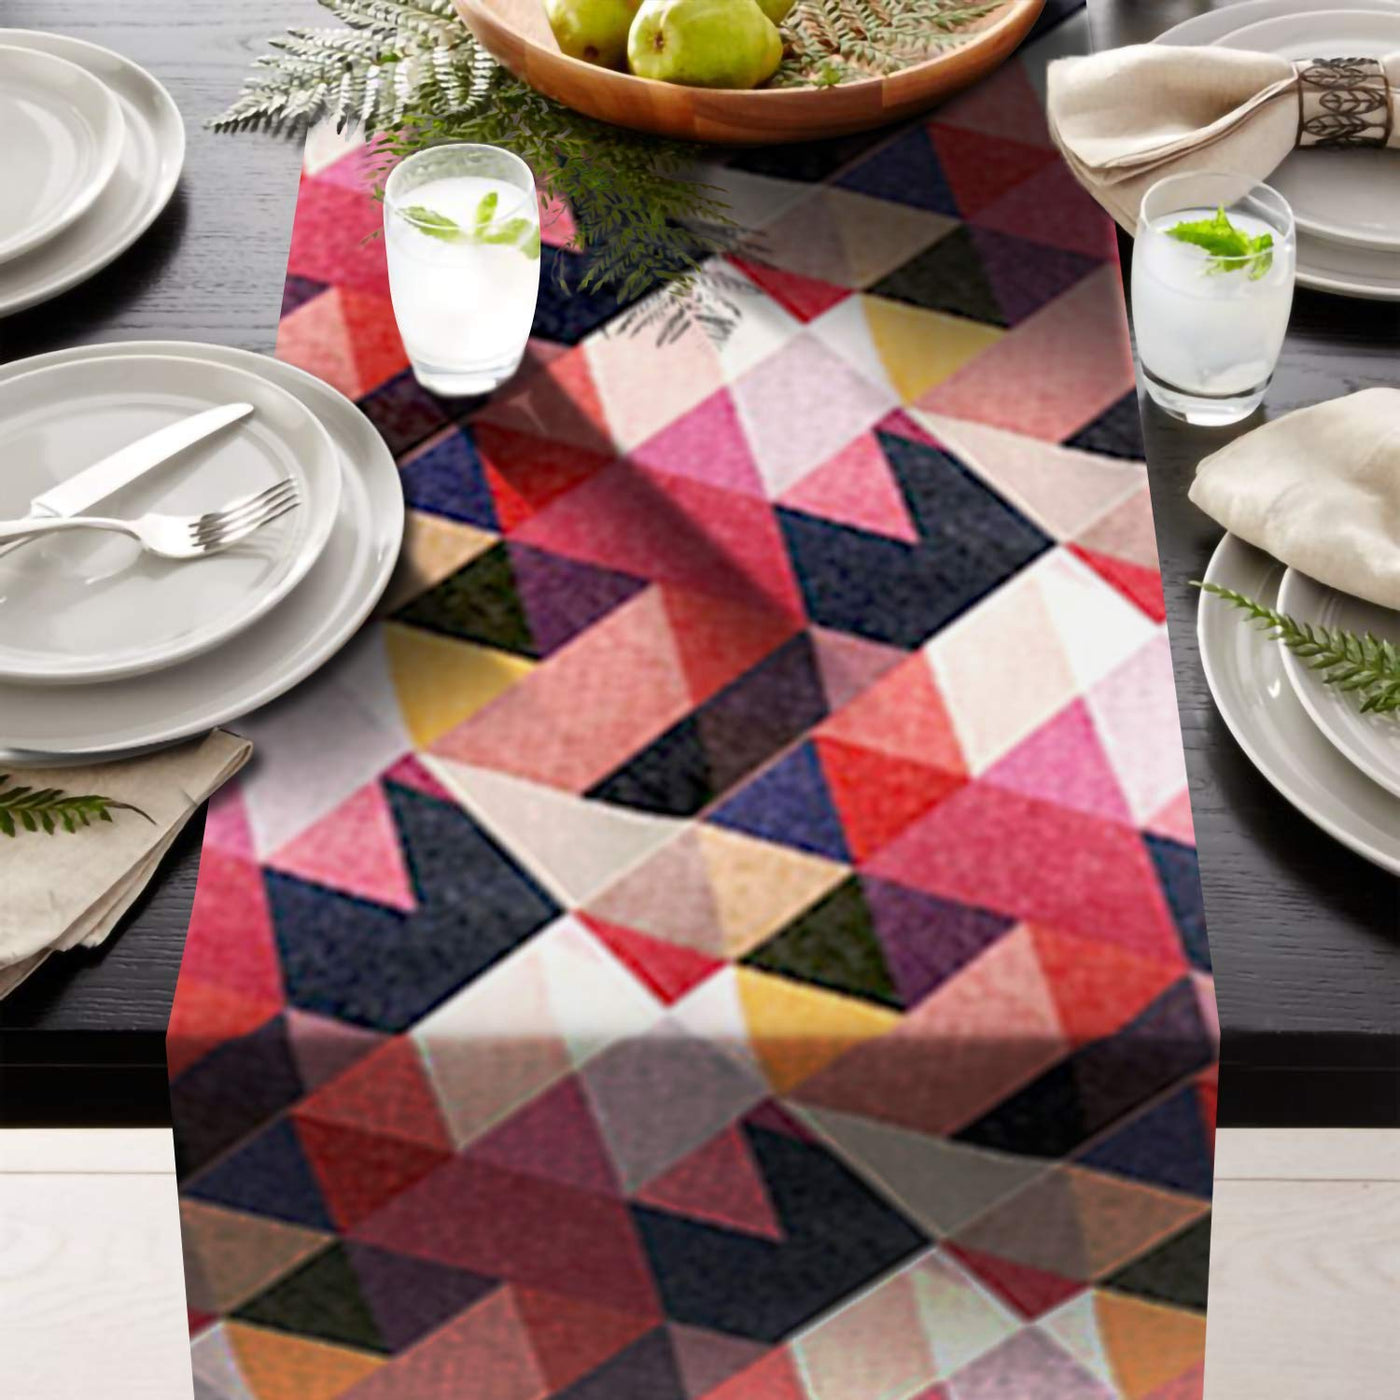 AAYU Geometric Pattern Table Runner 16 x 72 Inch Imitation Linen Runner for Everyday Birthday Baby Shower Party Banquet Decorations Table Settings (Red and Pink)